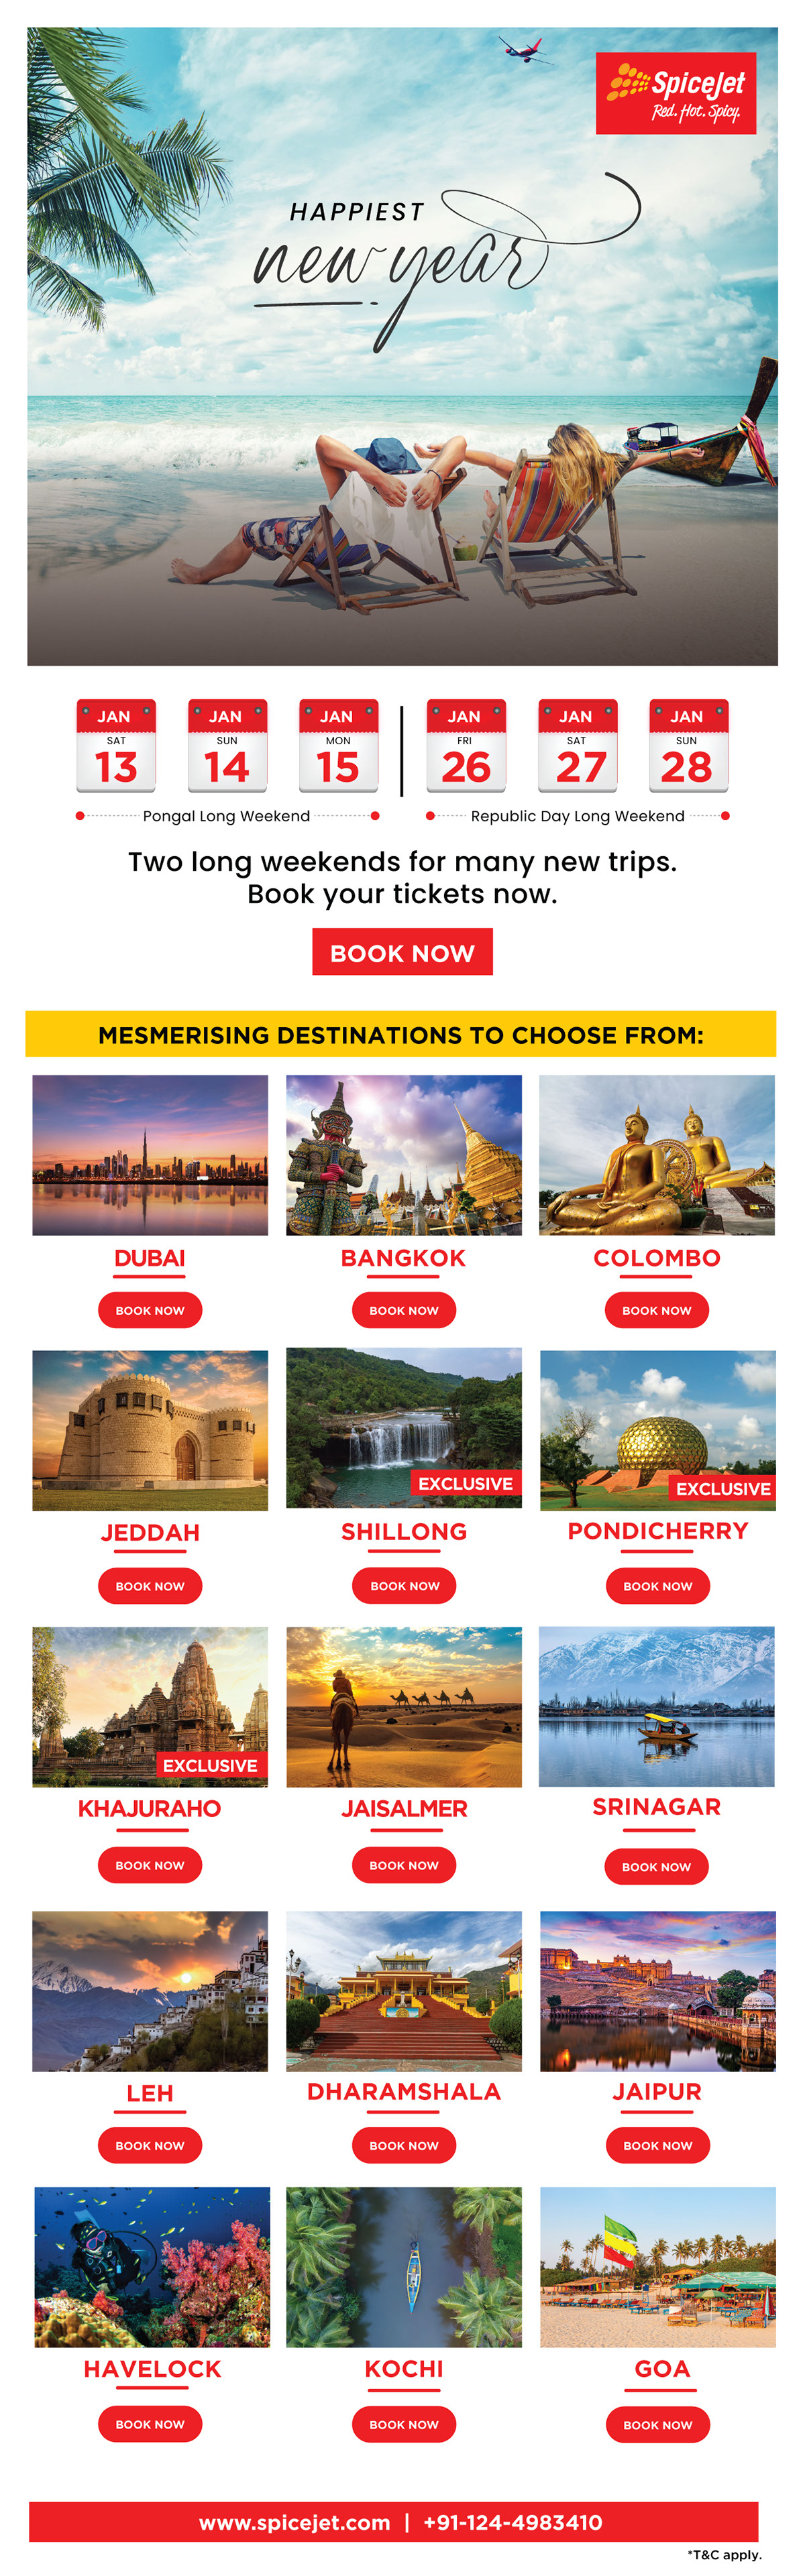 SpiceJet New Year long Weekend Emailer rendition image